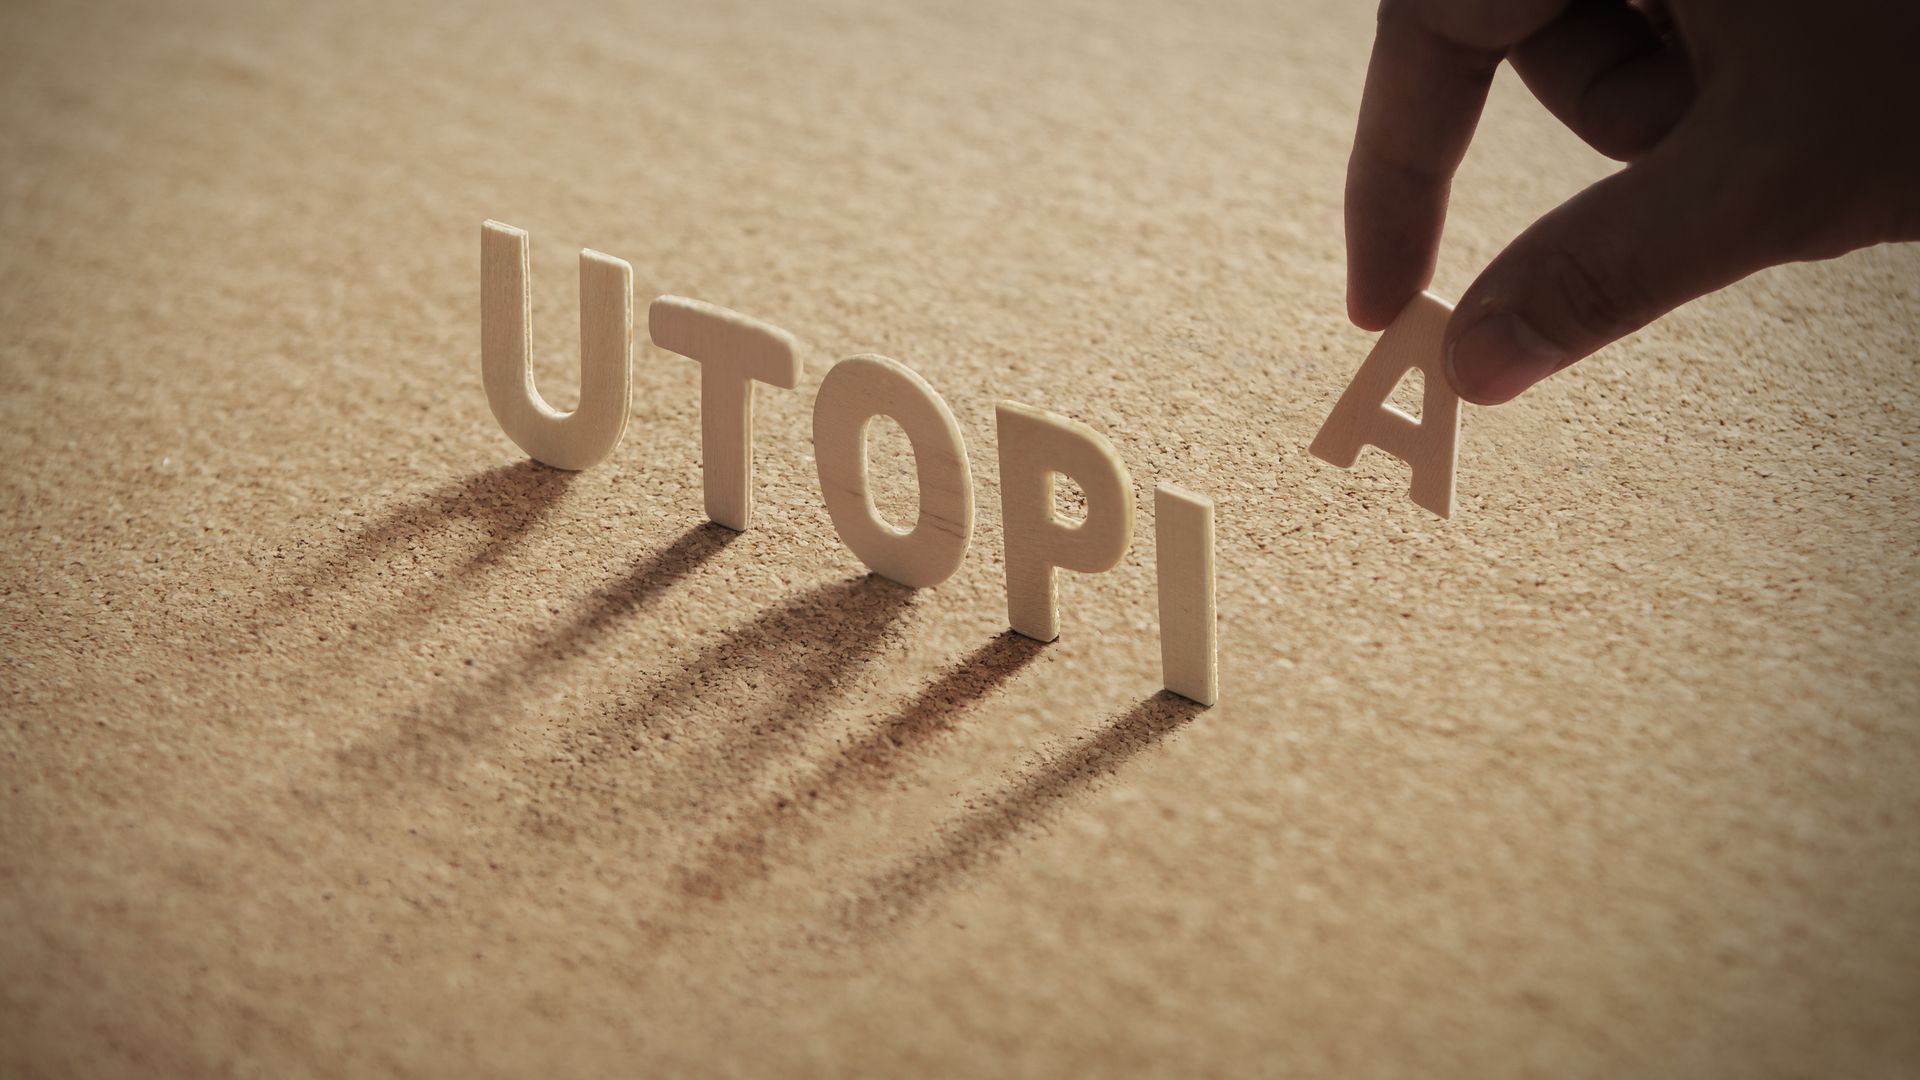 The word &quot;UTOPIA&quot; on a corkboard with human's hand removing the &quot;A&quot;